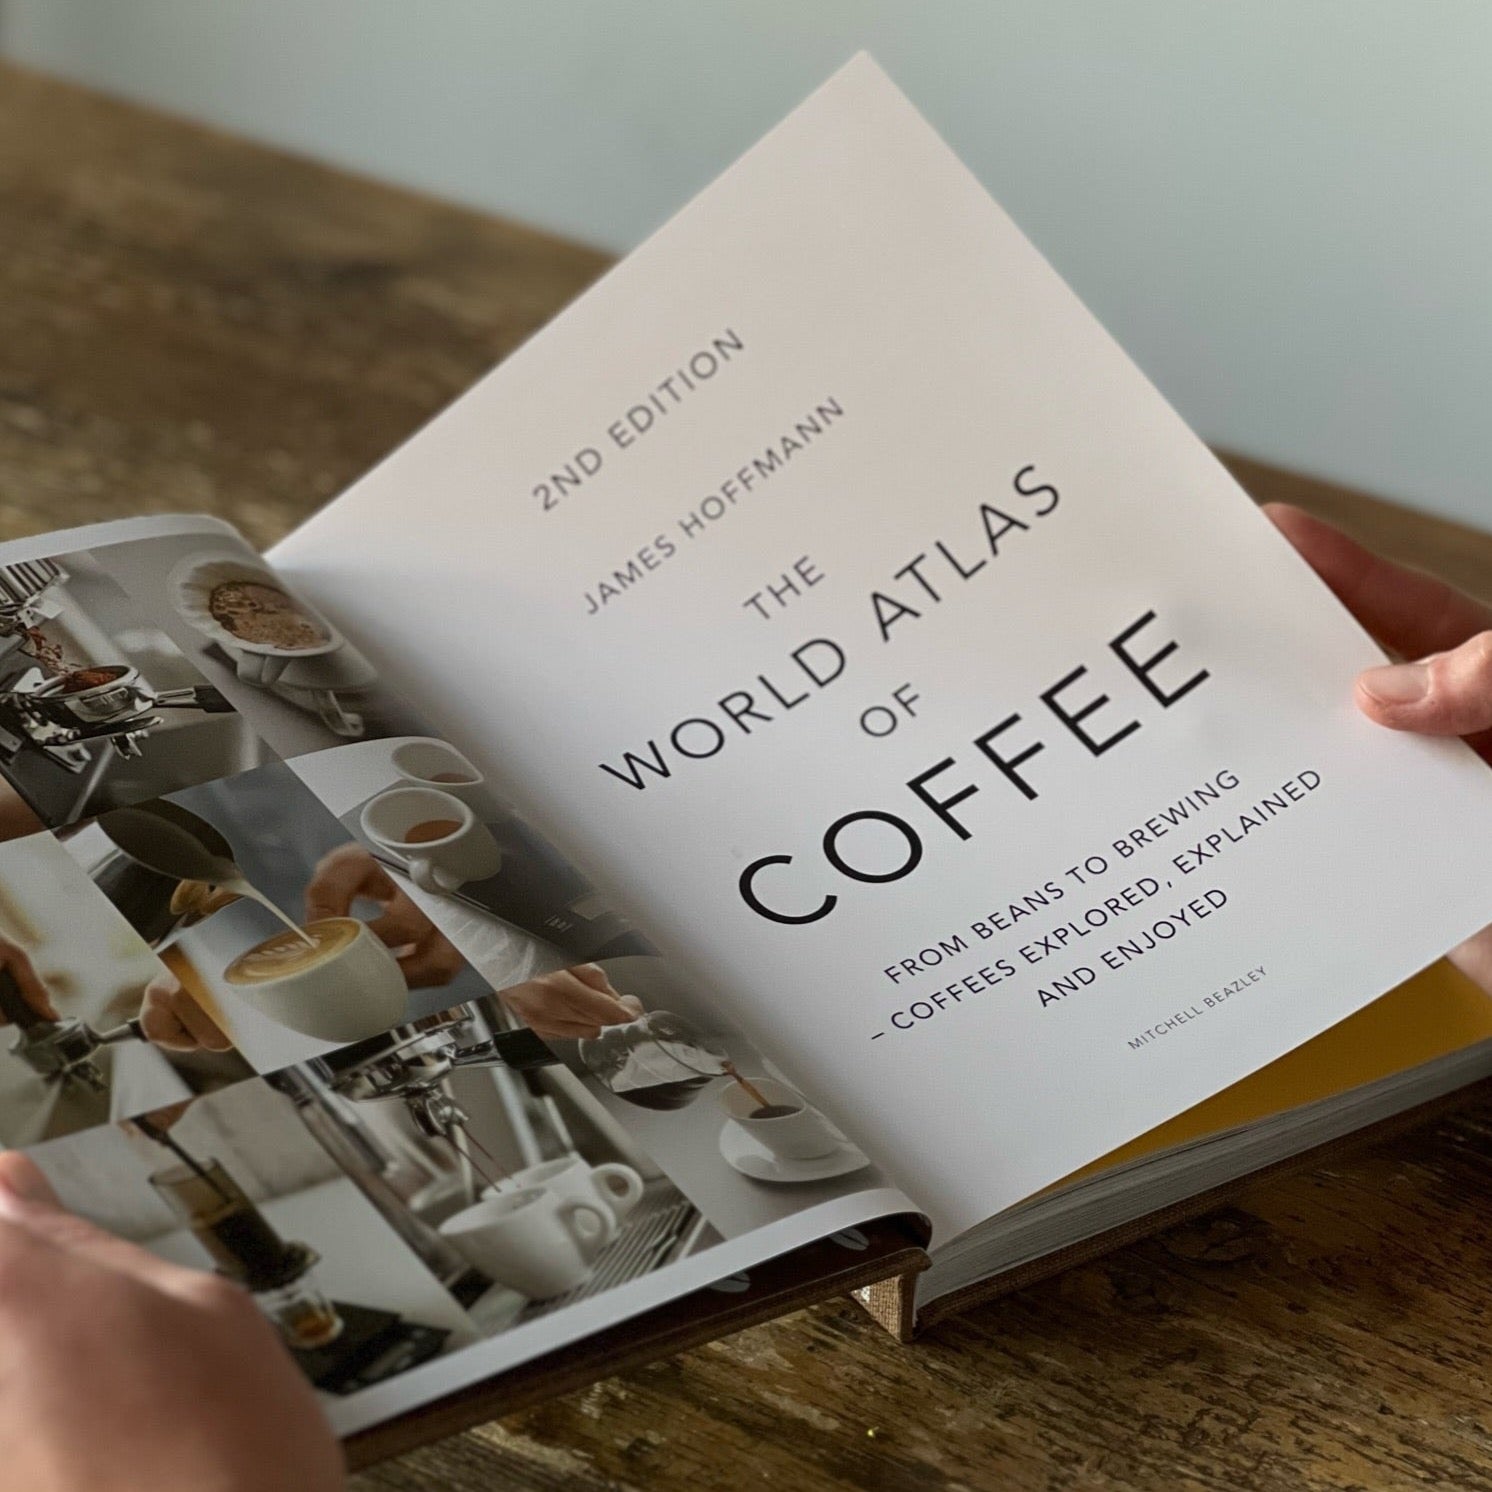 THE WORLD ATLAS OF COFFEE Book by James Hoffmann. THE BARN – THE